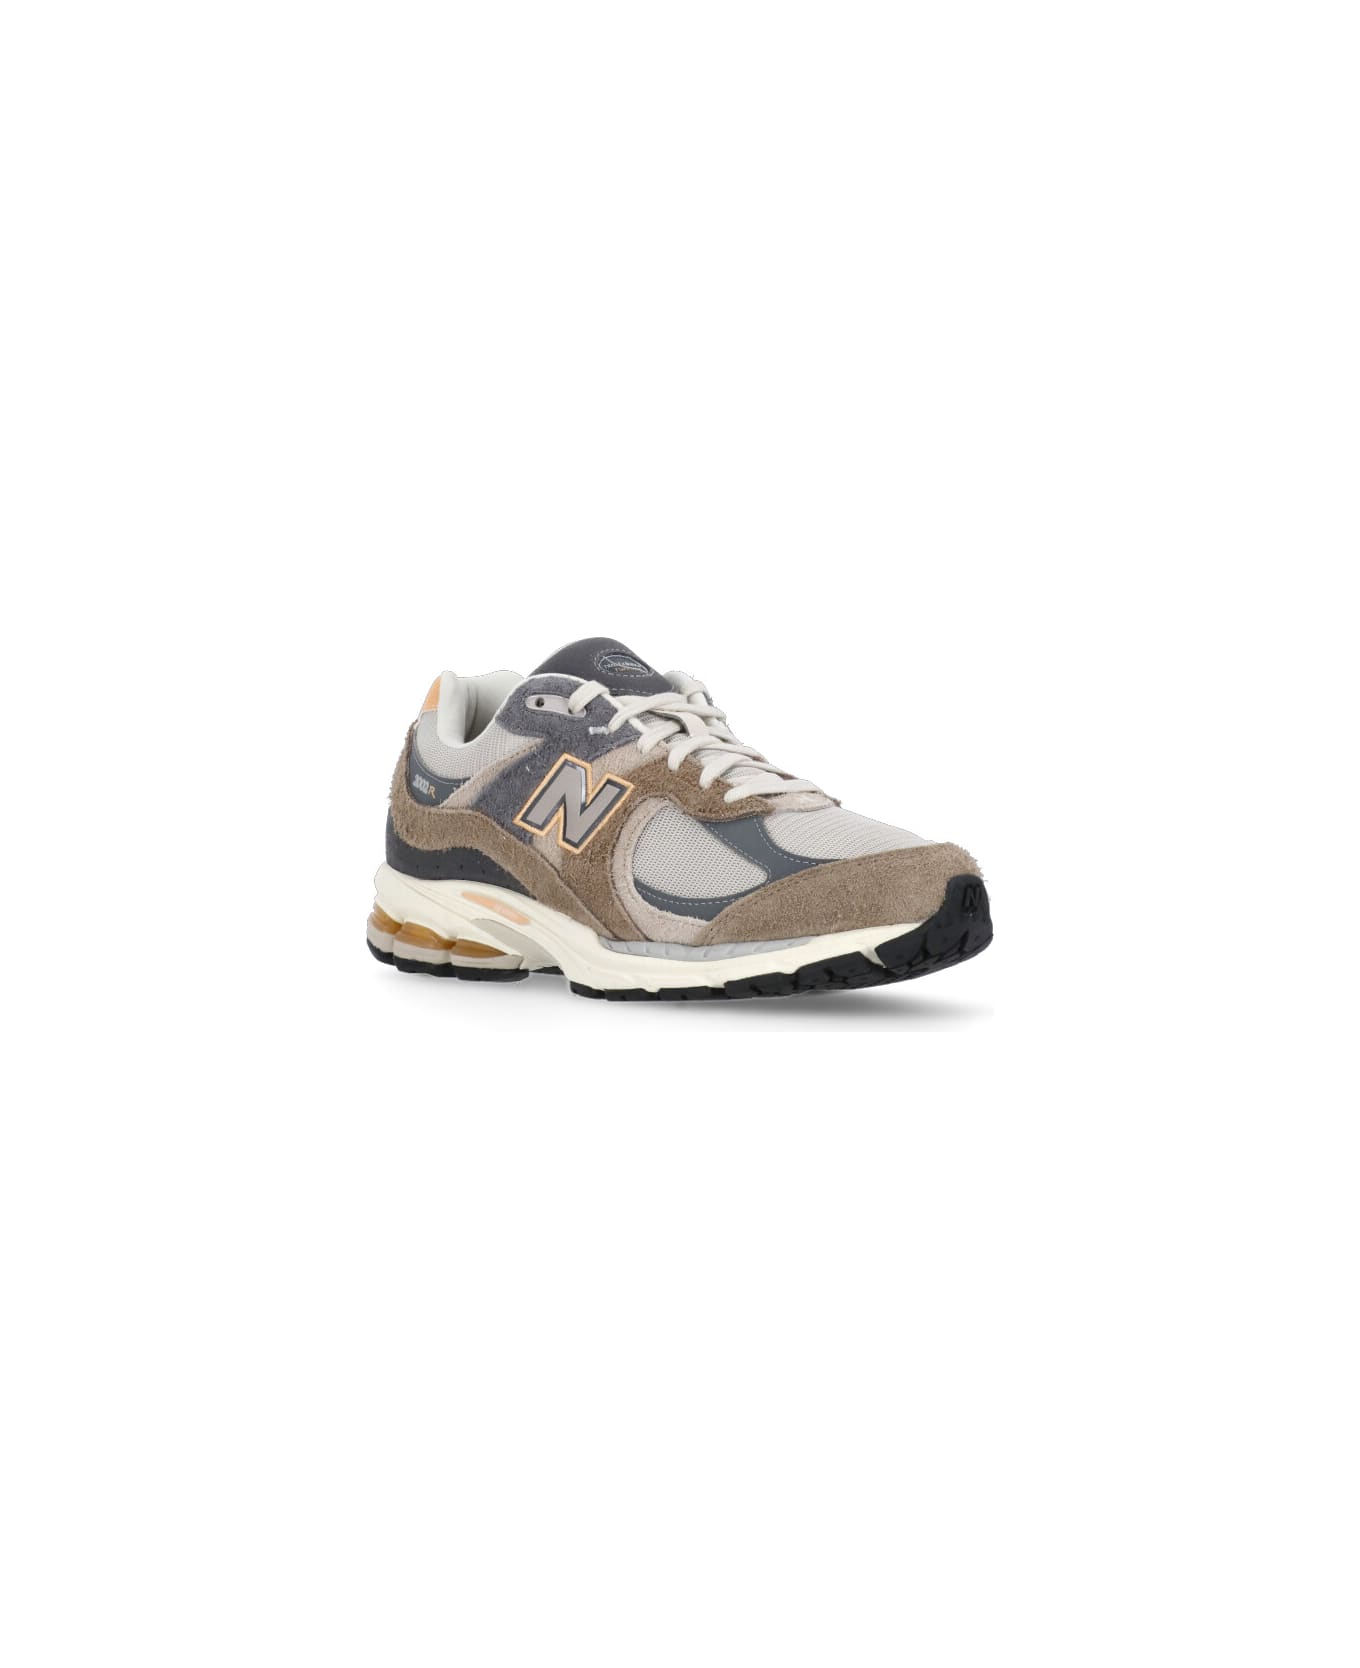 New Balance 2002r Sneakers - Brown